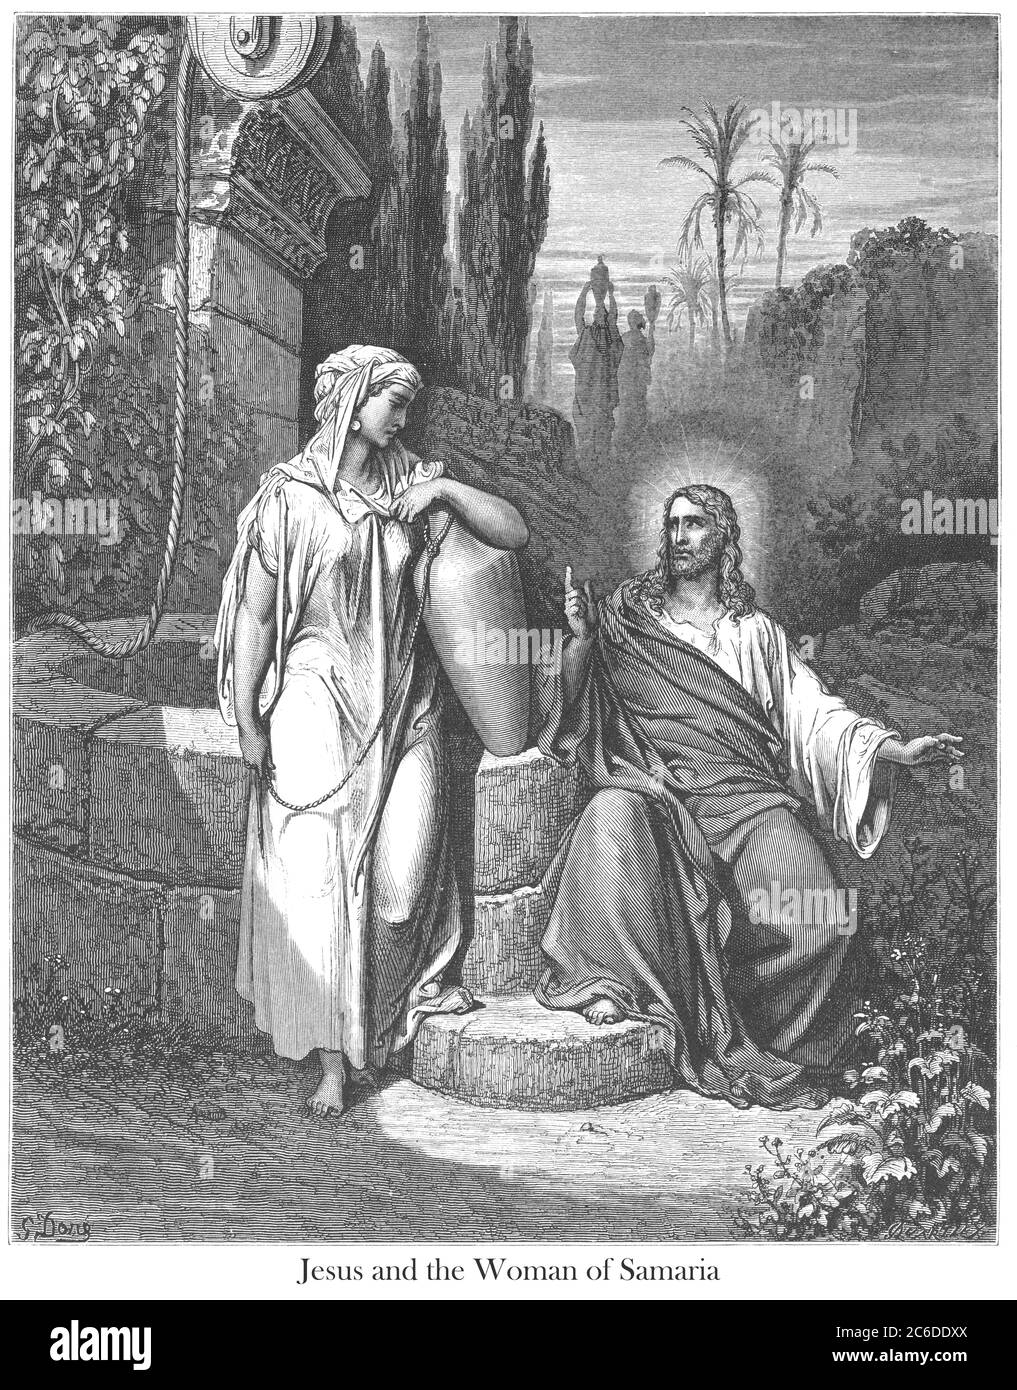 Jesus and the Woman of Samaria [John 4:13-14] From the book 'Bible Gallery' Illustrated by Gustave Dore with Memoir of Dore and Descriptive Letter-press by Talbot W. Chambers D.D. Published by Cassell & Company Limited in London and simultaneously by Mame in Tours, France in 1866 Stock Photo